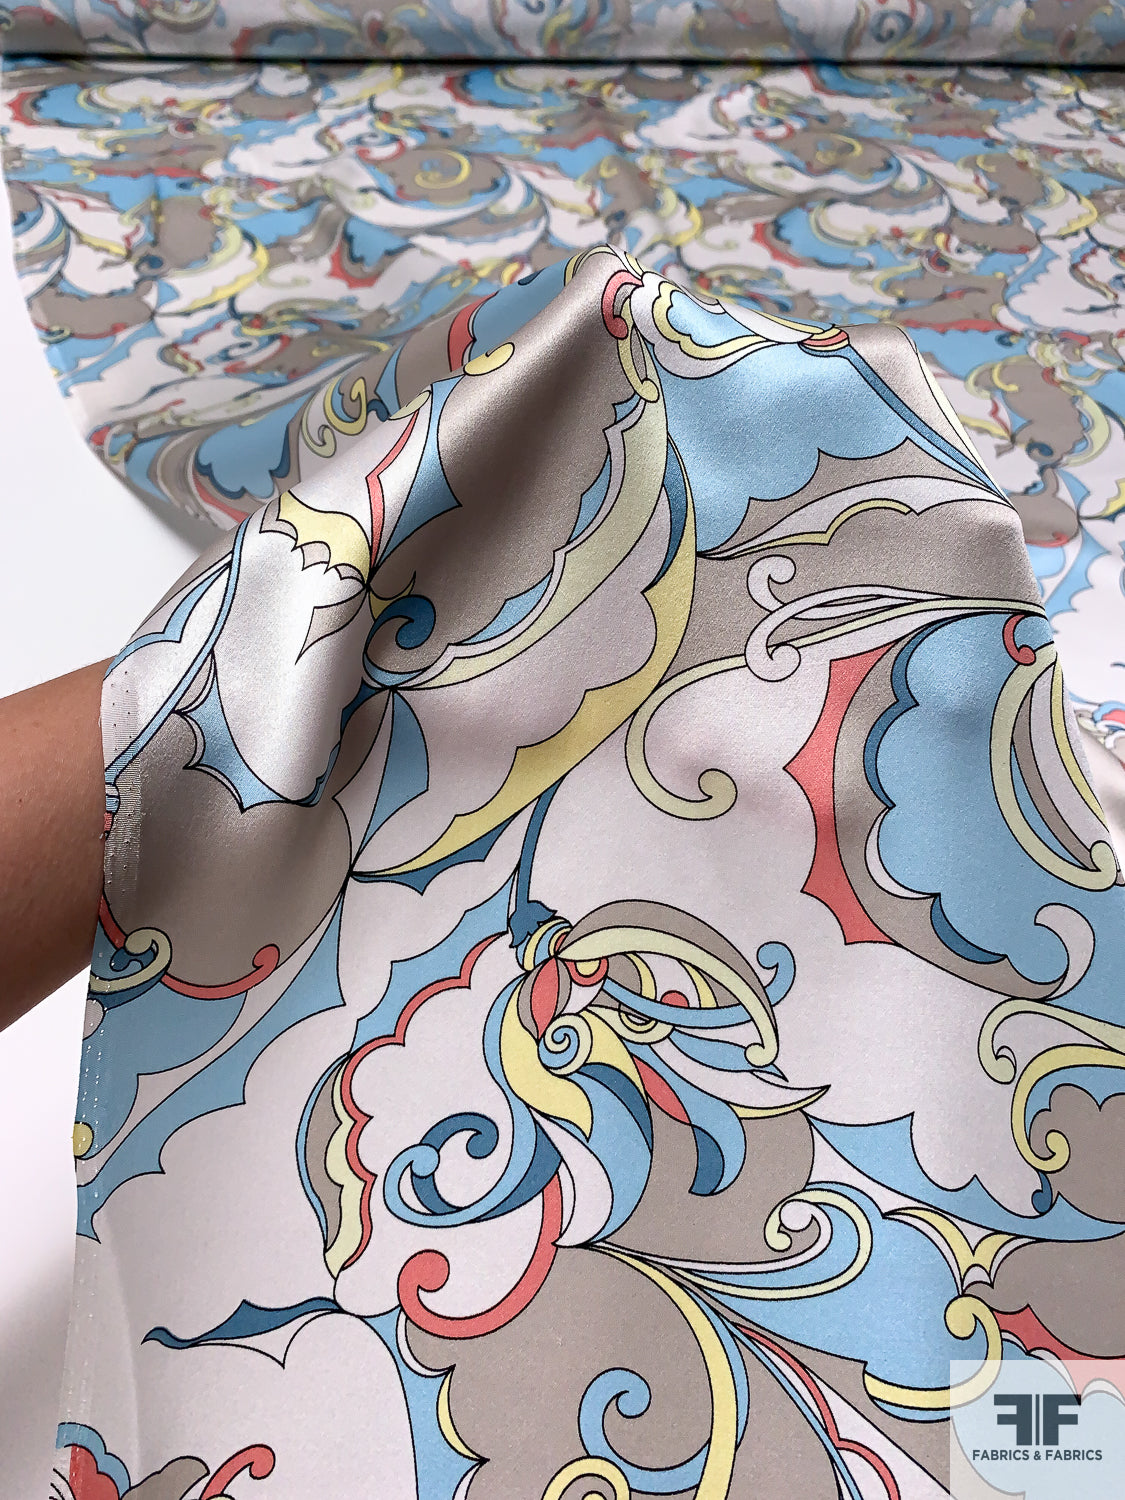 Pucci-esque Paisley-Like Printed Silk Charmeuse - Sky Blue / Coral / Yellow / Light Grey